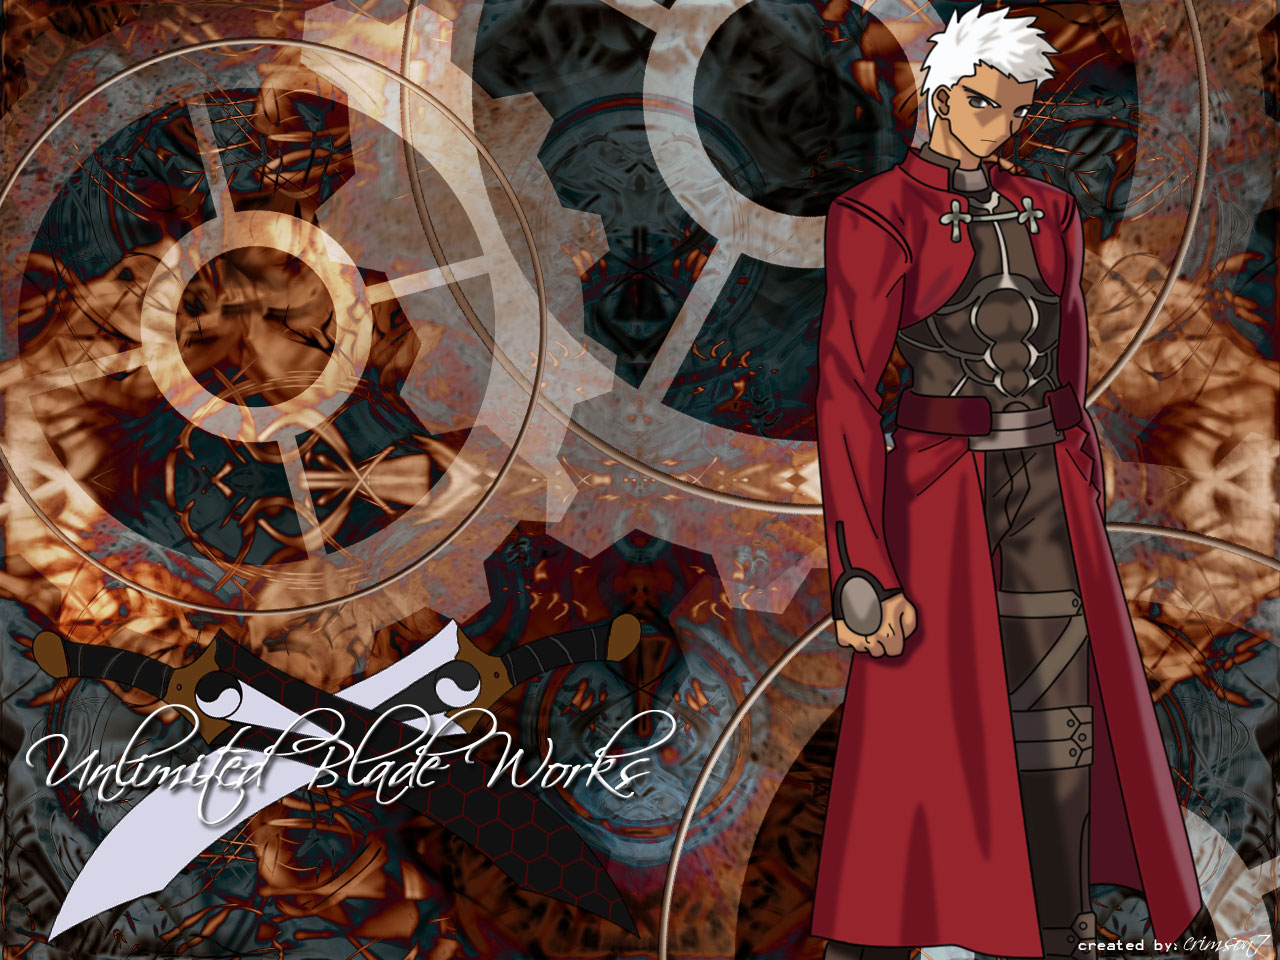 Type Moon Fate Stay Night Archer Wallpaper Style Moon On Fate Stay Night Unlimited Blade Works 1280x960 Wallpaper Teahub Io